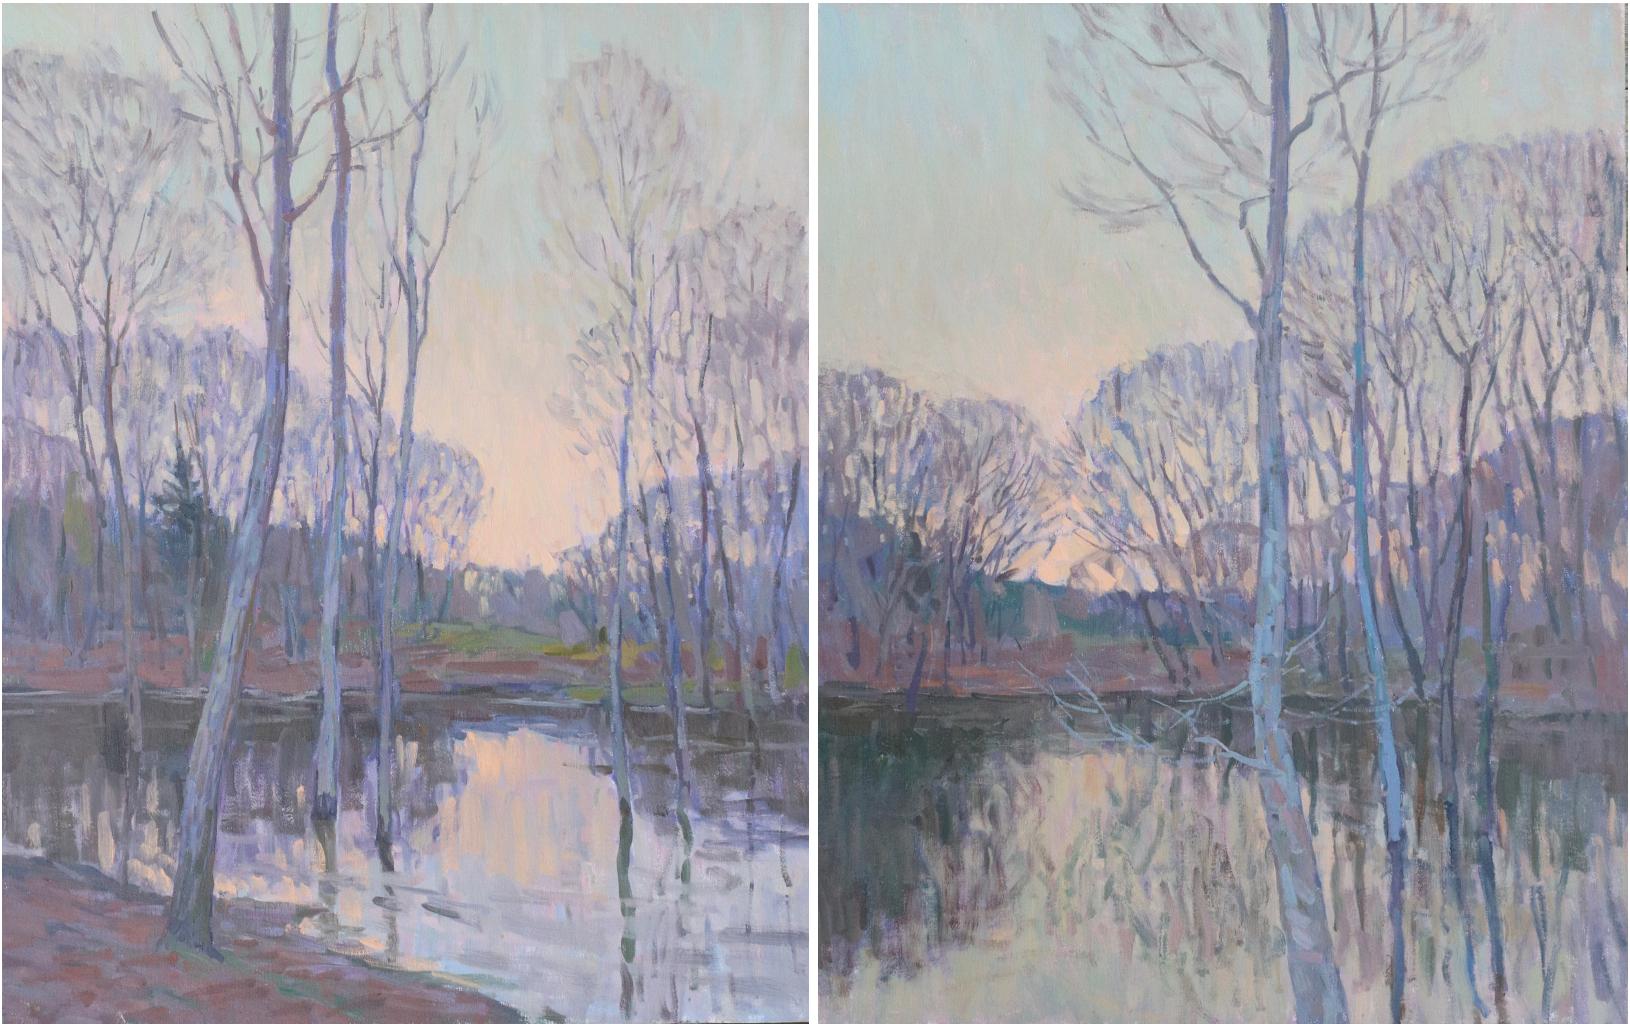 Sunset on Silver Pond, Diptych